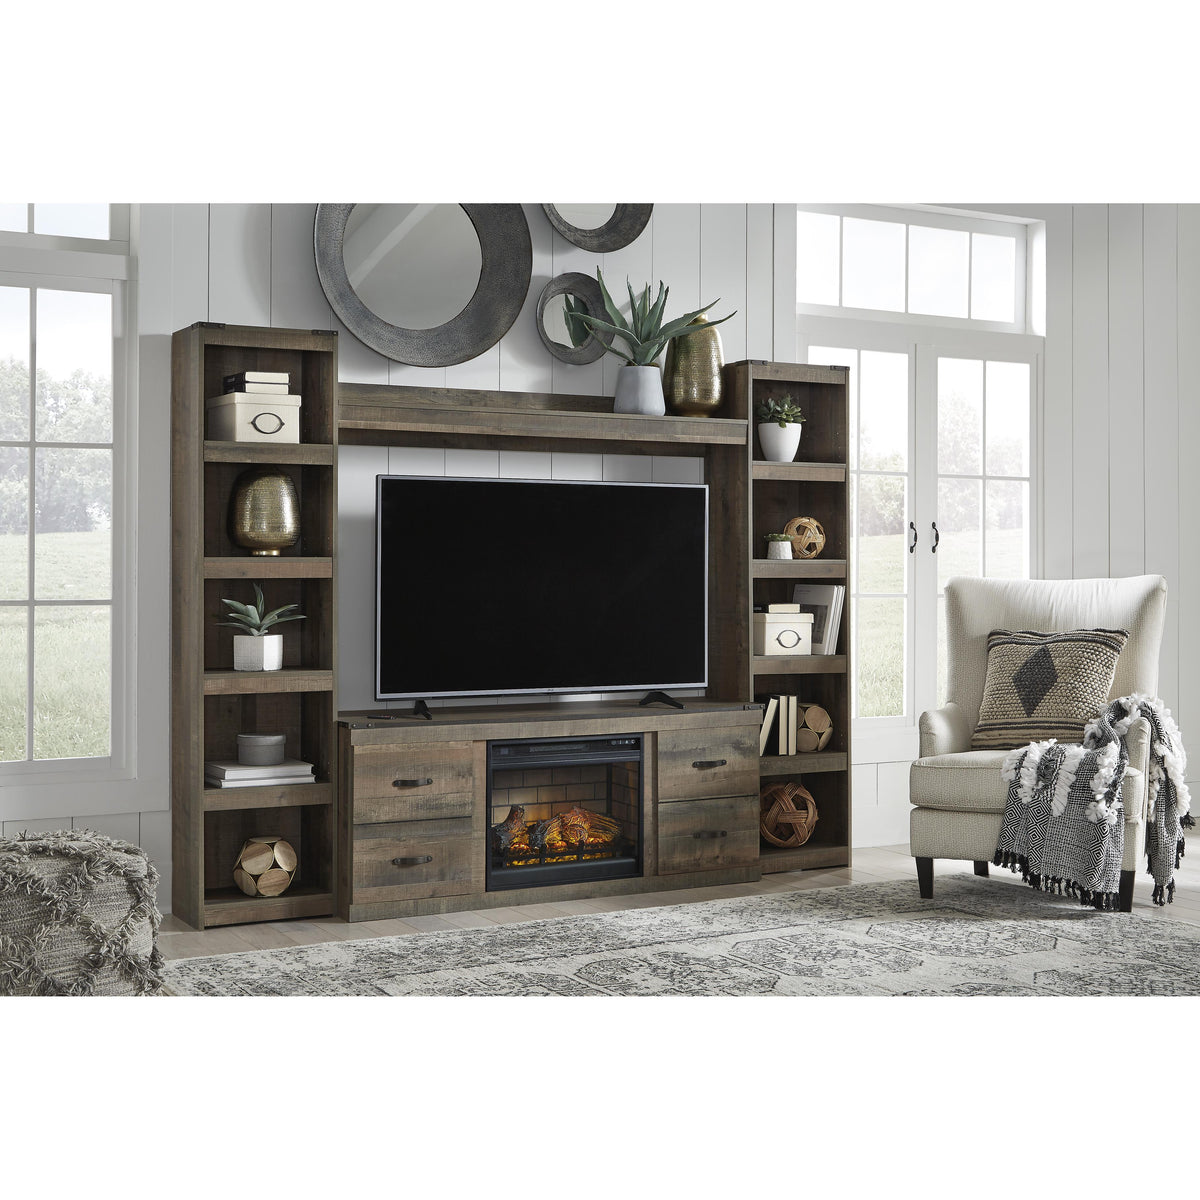 Signature Design by Ashley Trinell EW0446W9 4 pc Entertainment Center with Electric Fireplace